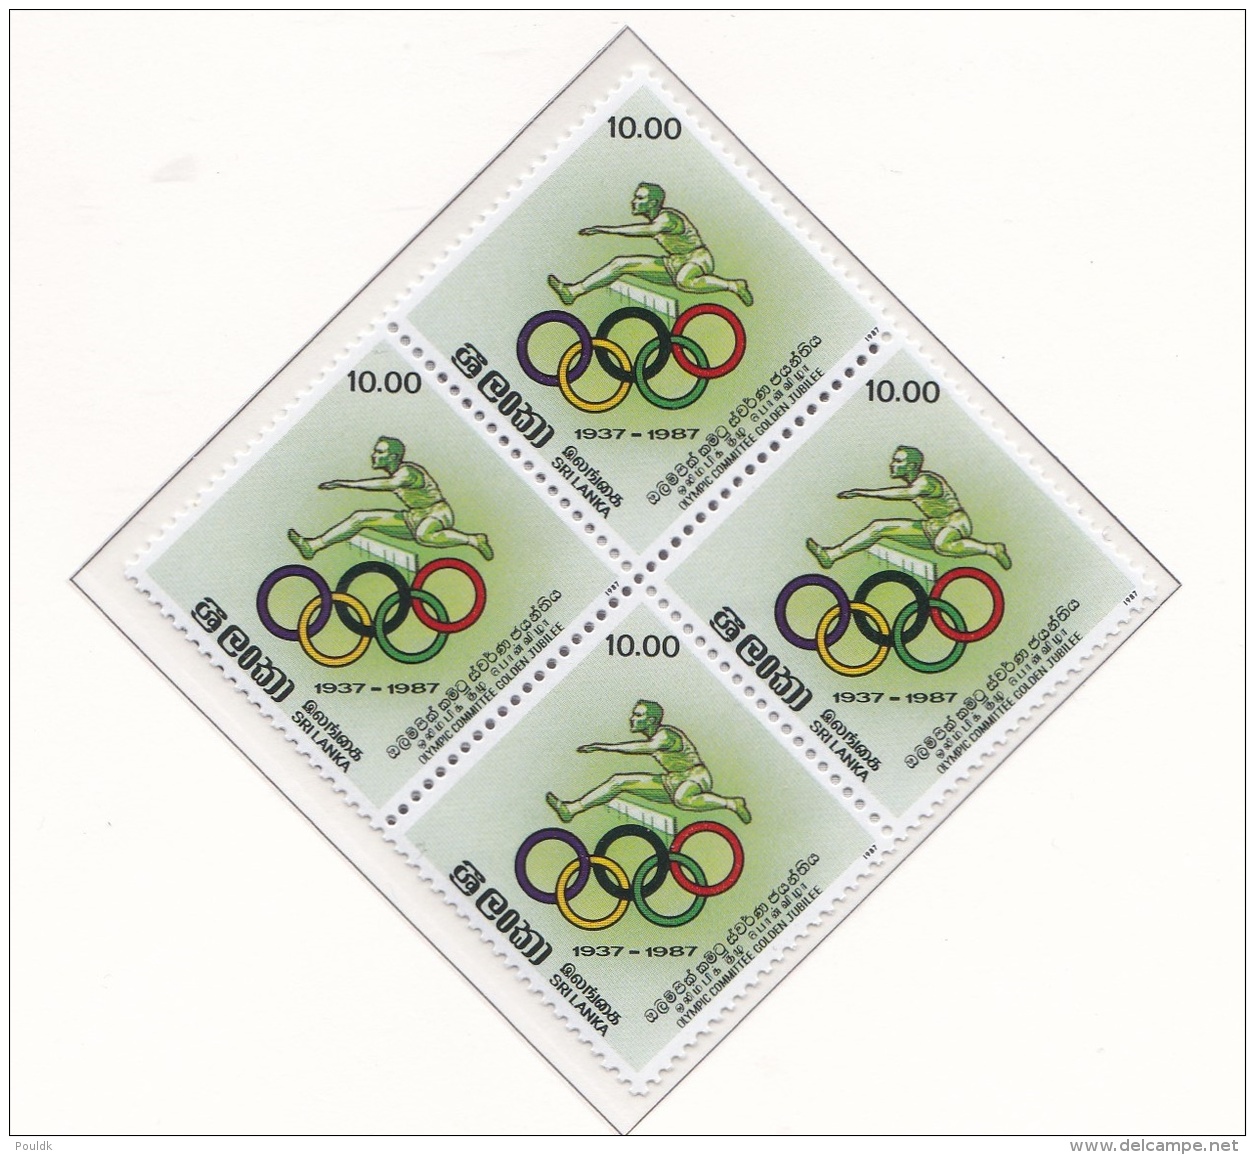 Sri Lanka 1988 Olympic Games In Seoul, Corea - 4 Stamps Printed Together MNH/**    (H43) - Verano 1988: Seúl